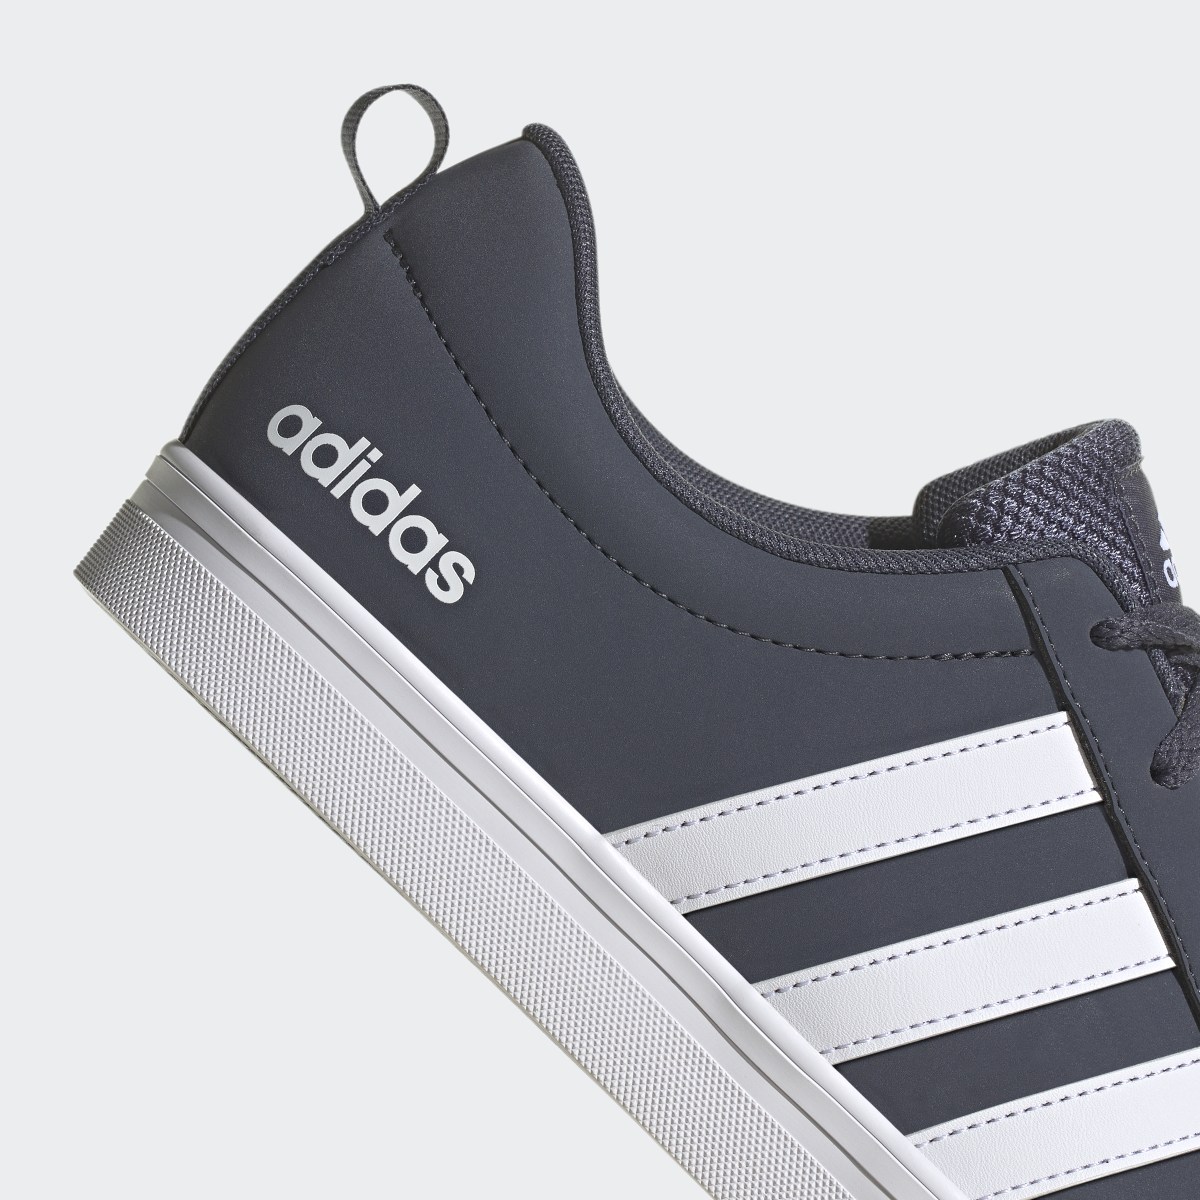 Adidas VS Pace 2.0 Lifestyle Skateboarding Shoes. 9